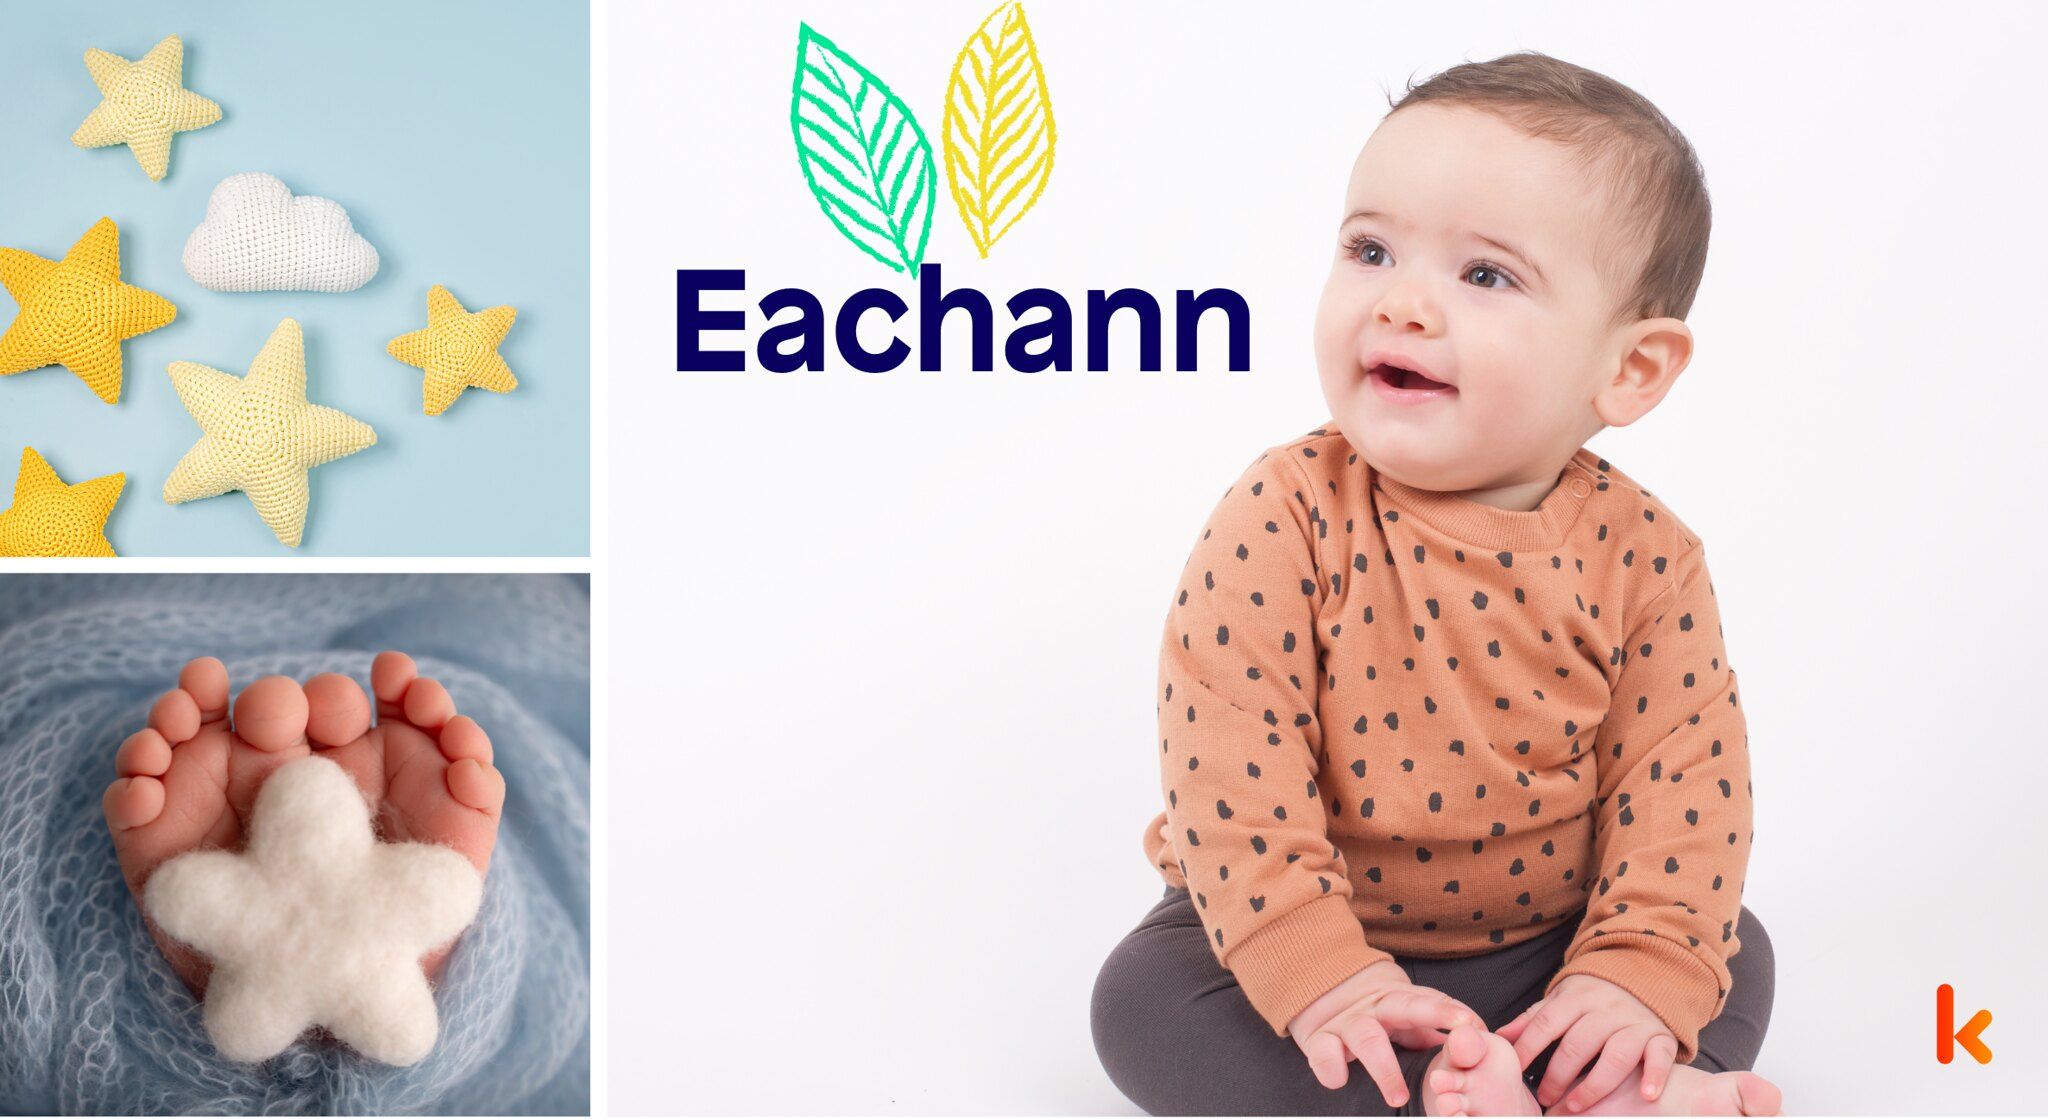 Meaning of the name Eachann